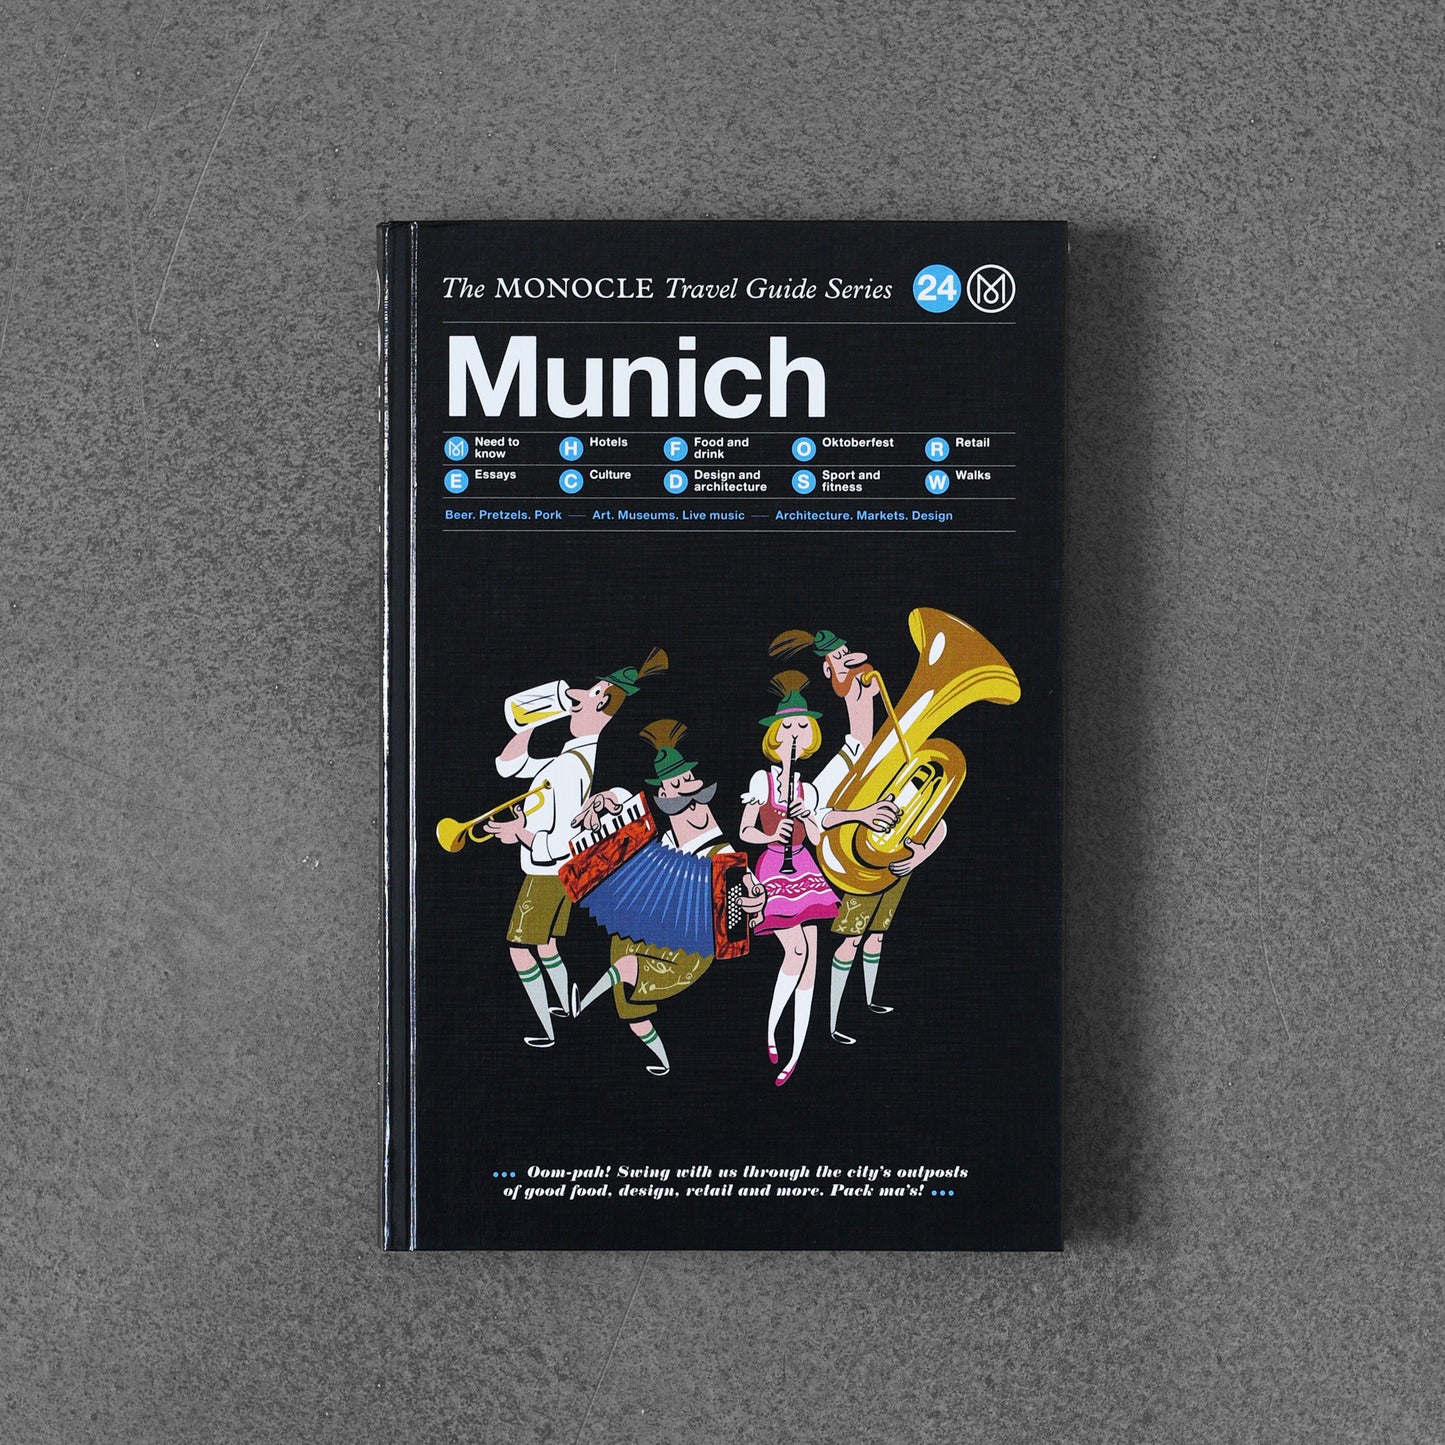 The Monocle Travel Guide Series: Munich